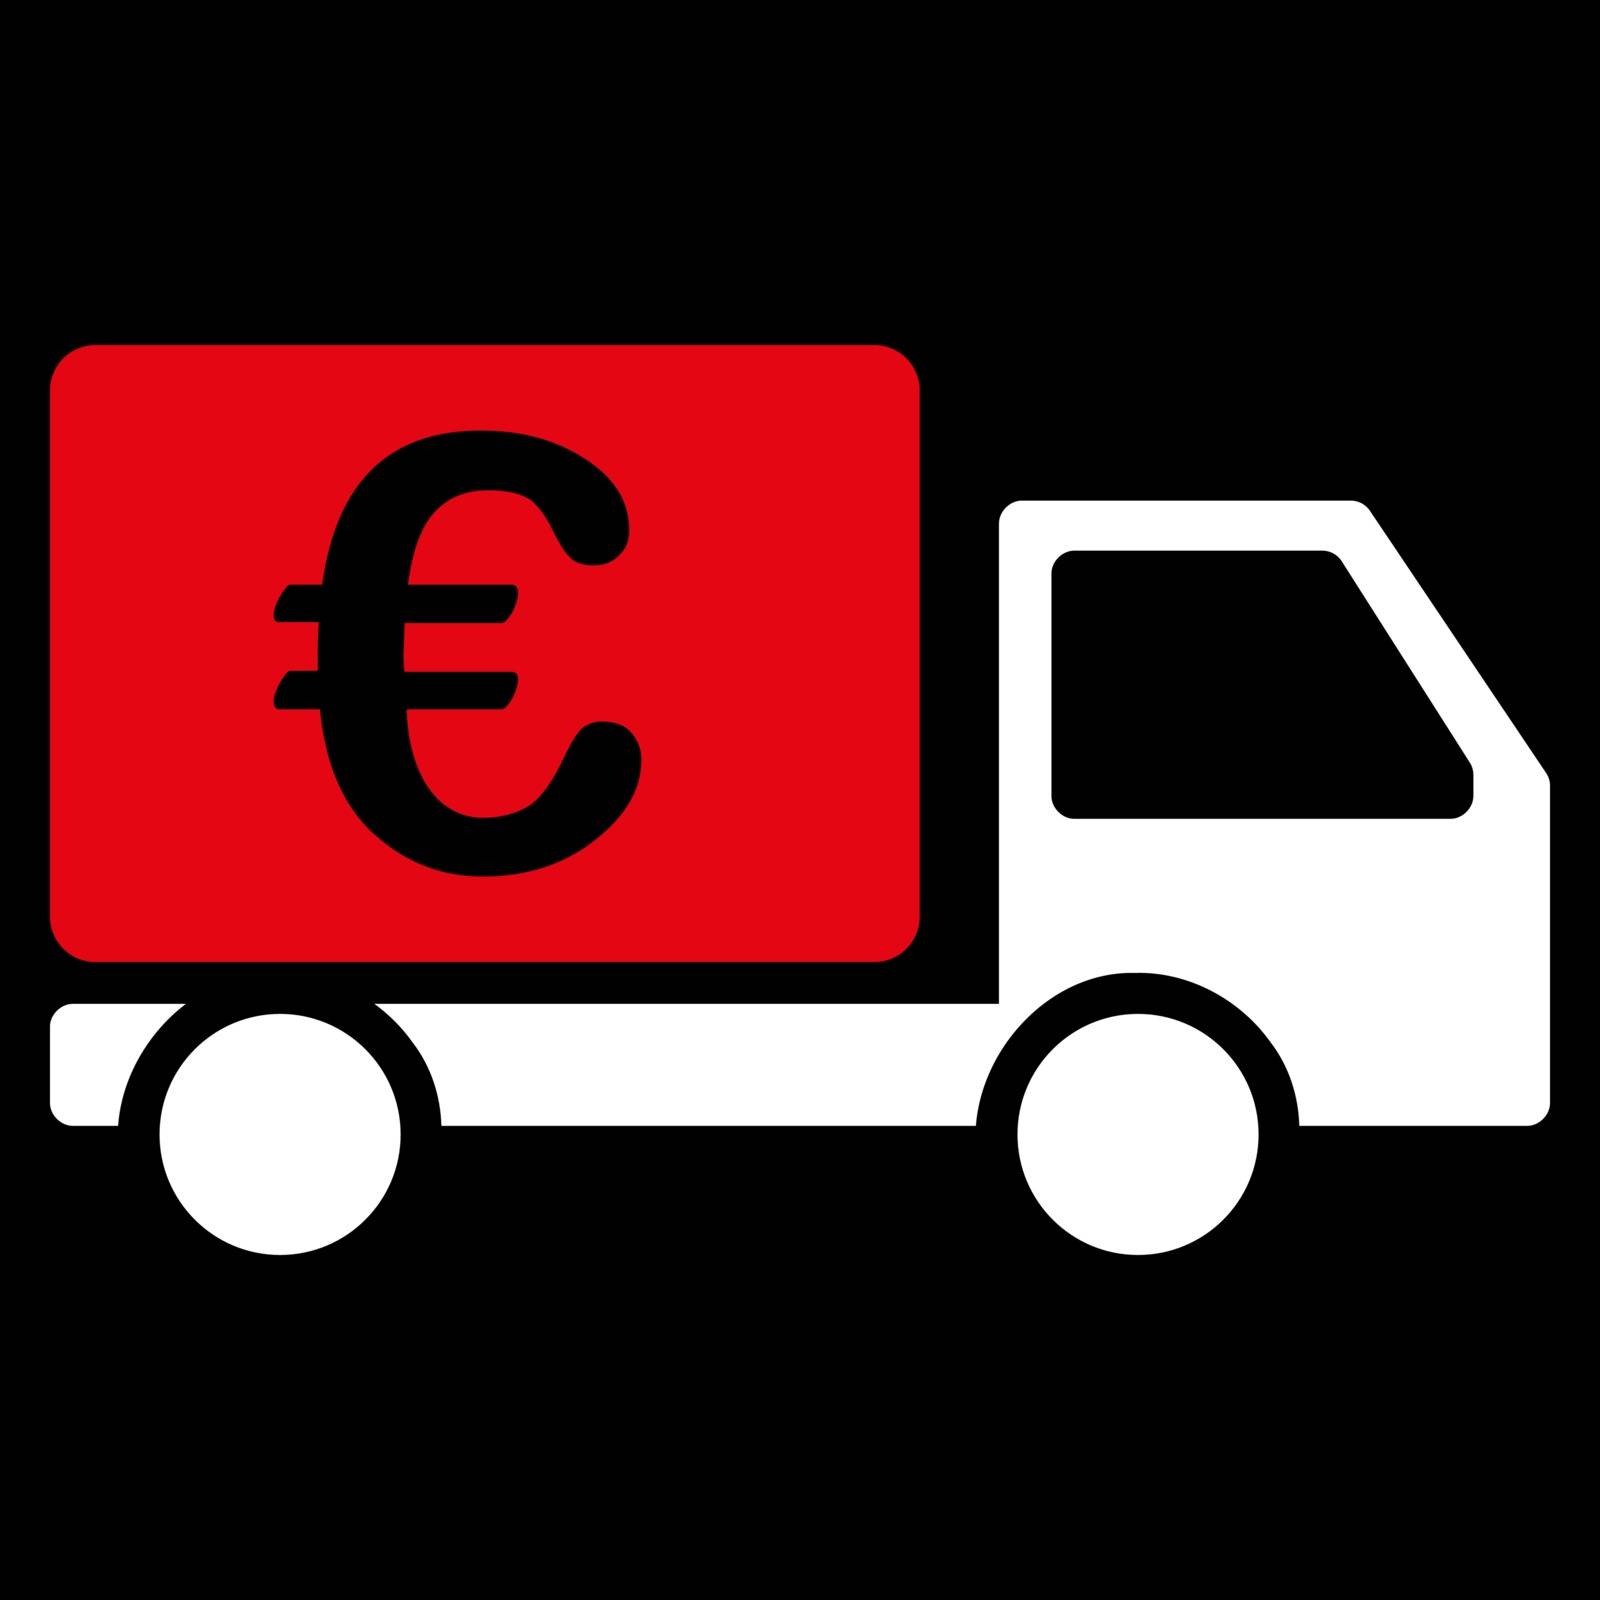 Collector car icon from BiColor Euro Banking Set by ahasoft